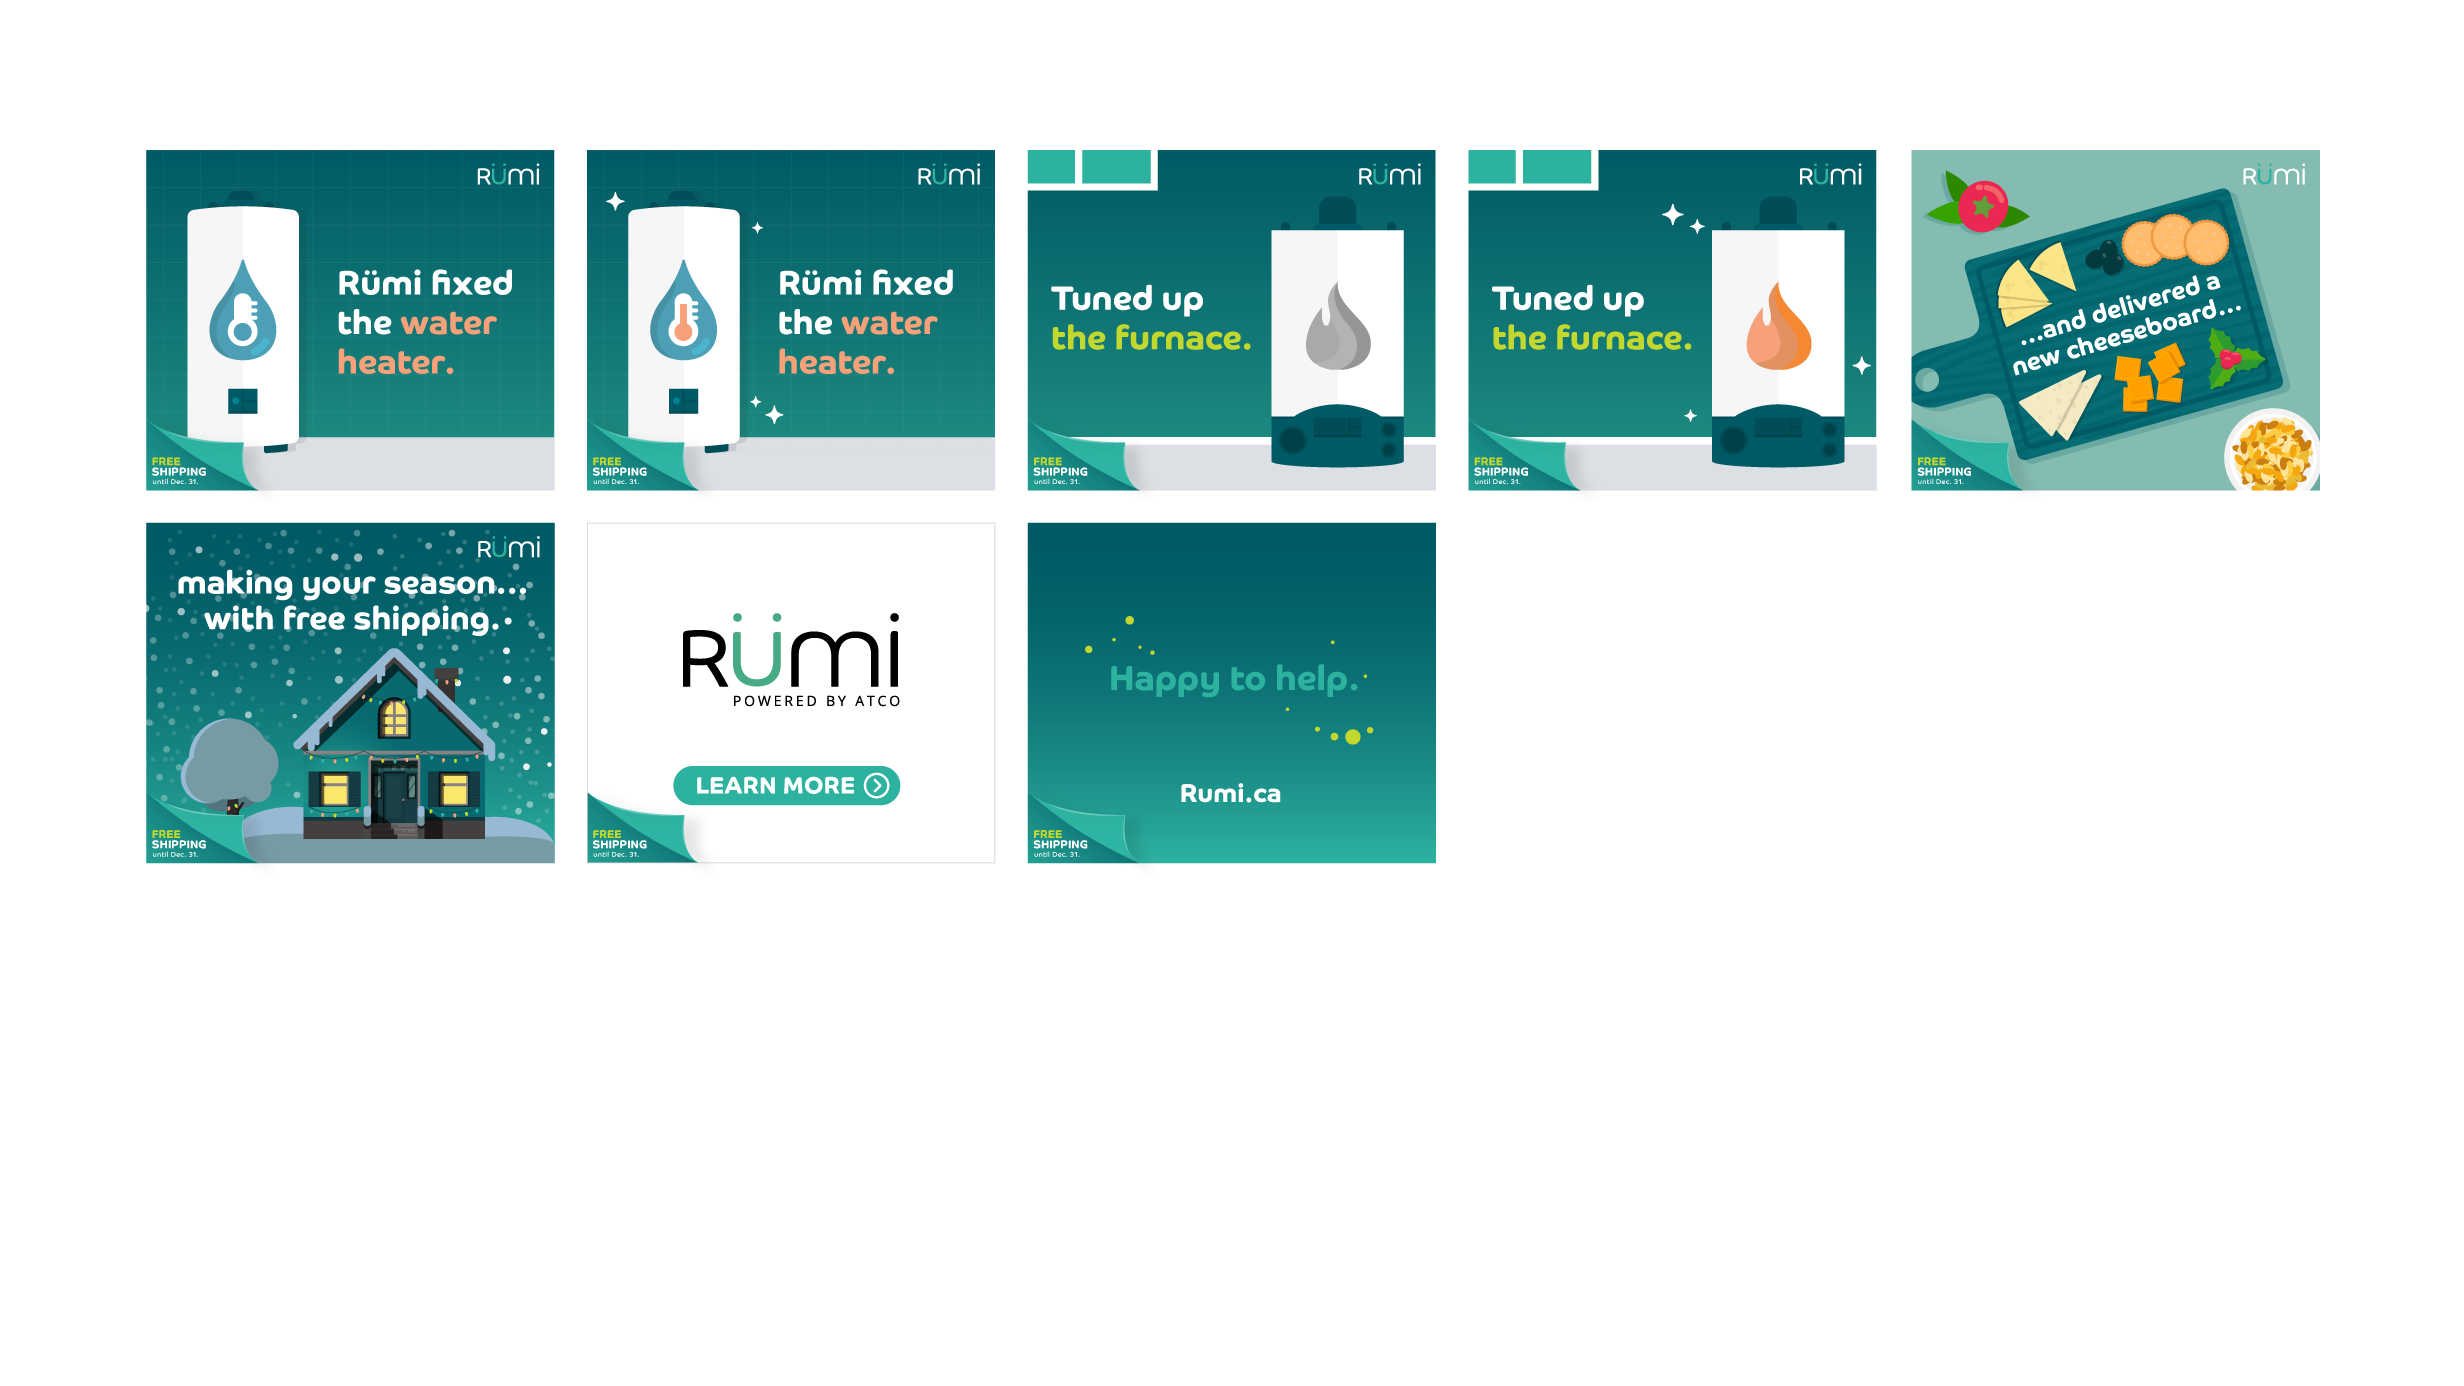 A high-fidelity, illustrative storyboard showing a theme for Rumi's products and services